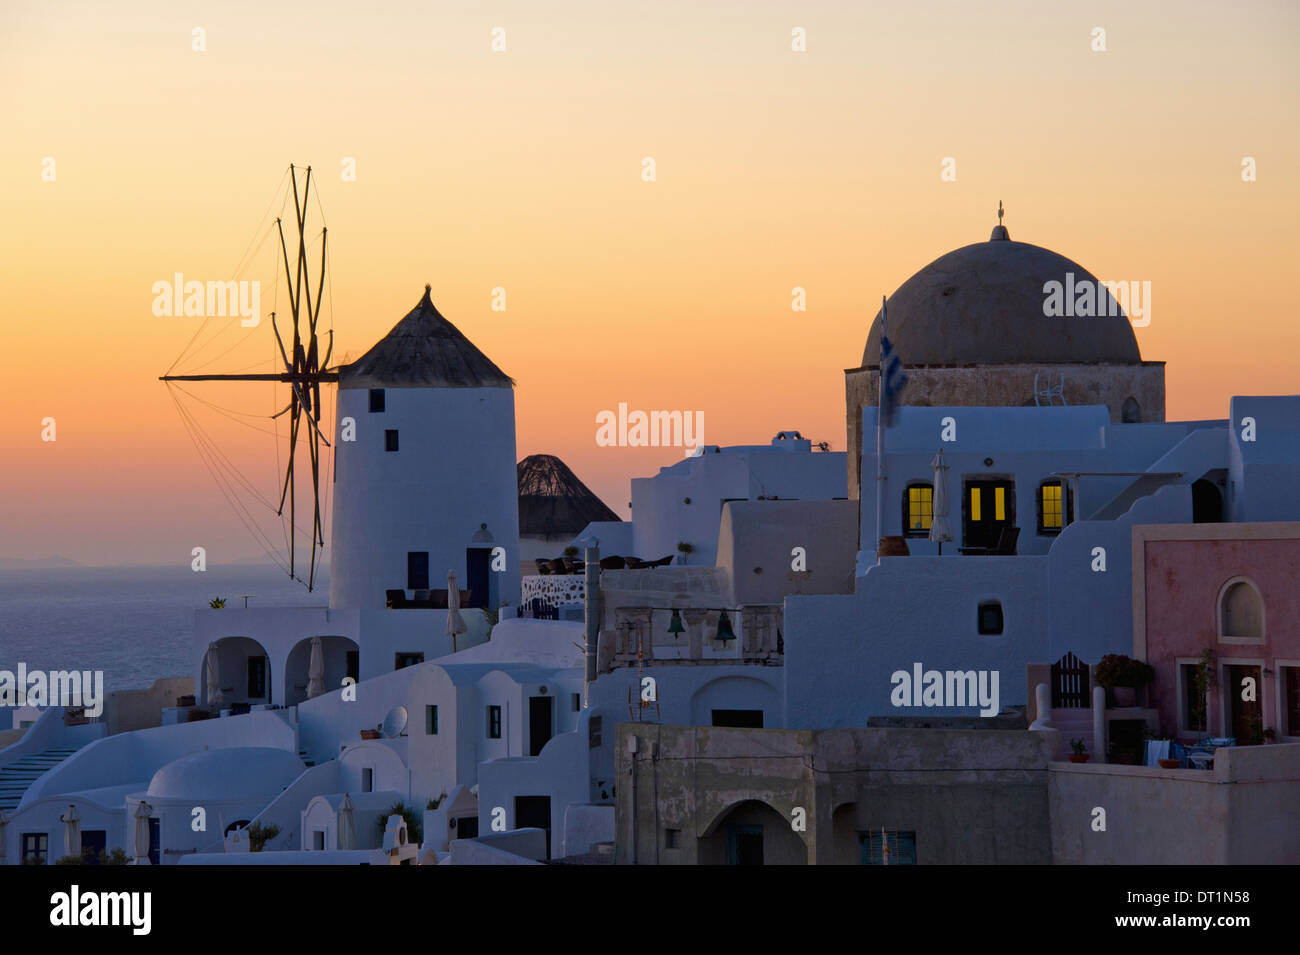 The historic white washed houses windmills and domed church of Oia town on Santorini island Stock Photo